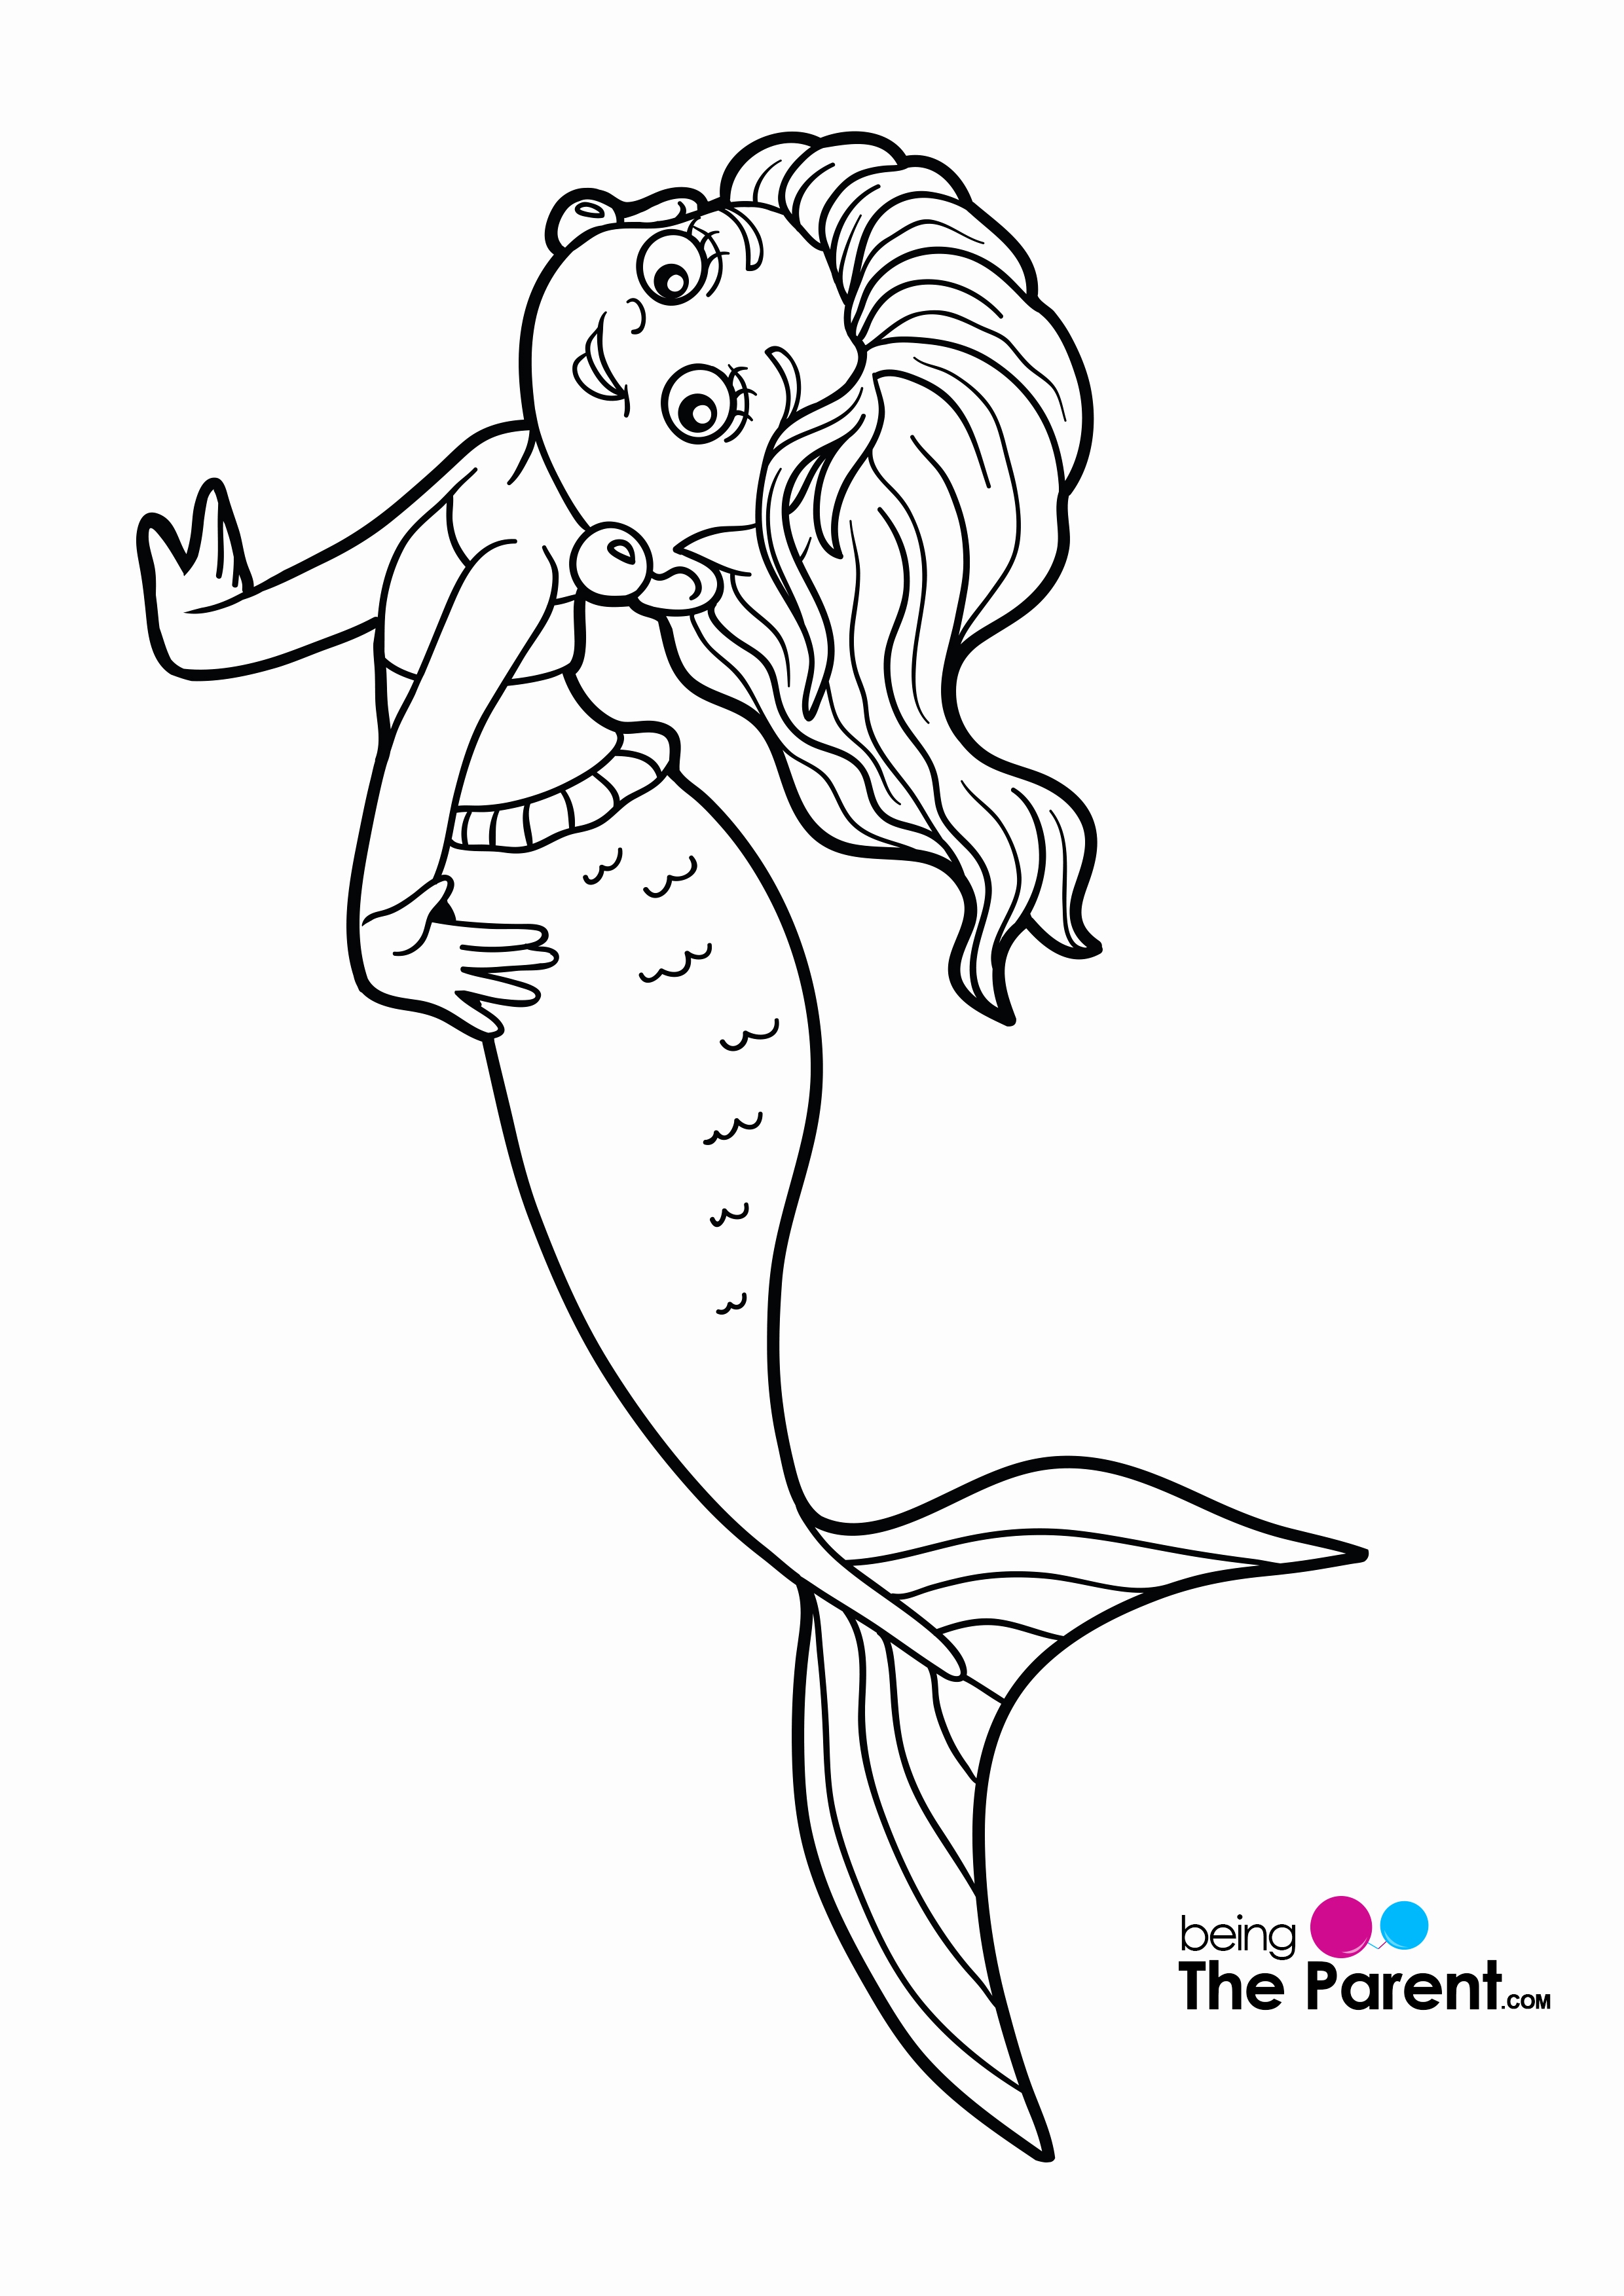 Adorable Baby Mermaid Coloring Pages : 40 the little mermaid pictures